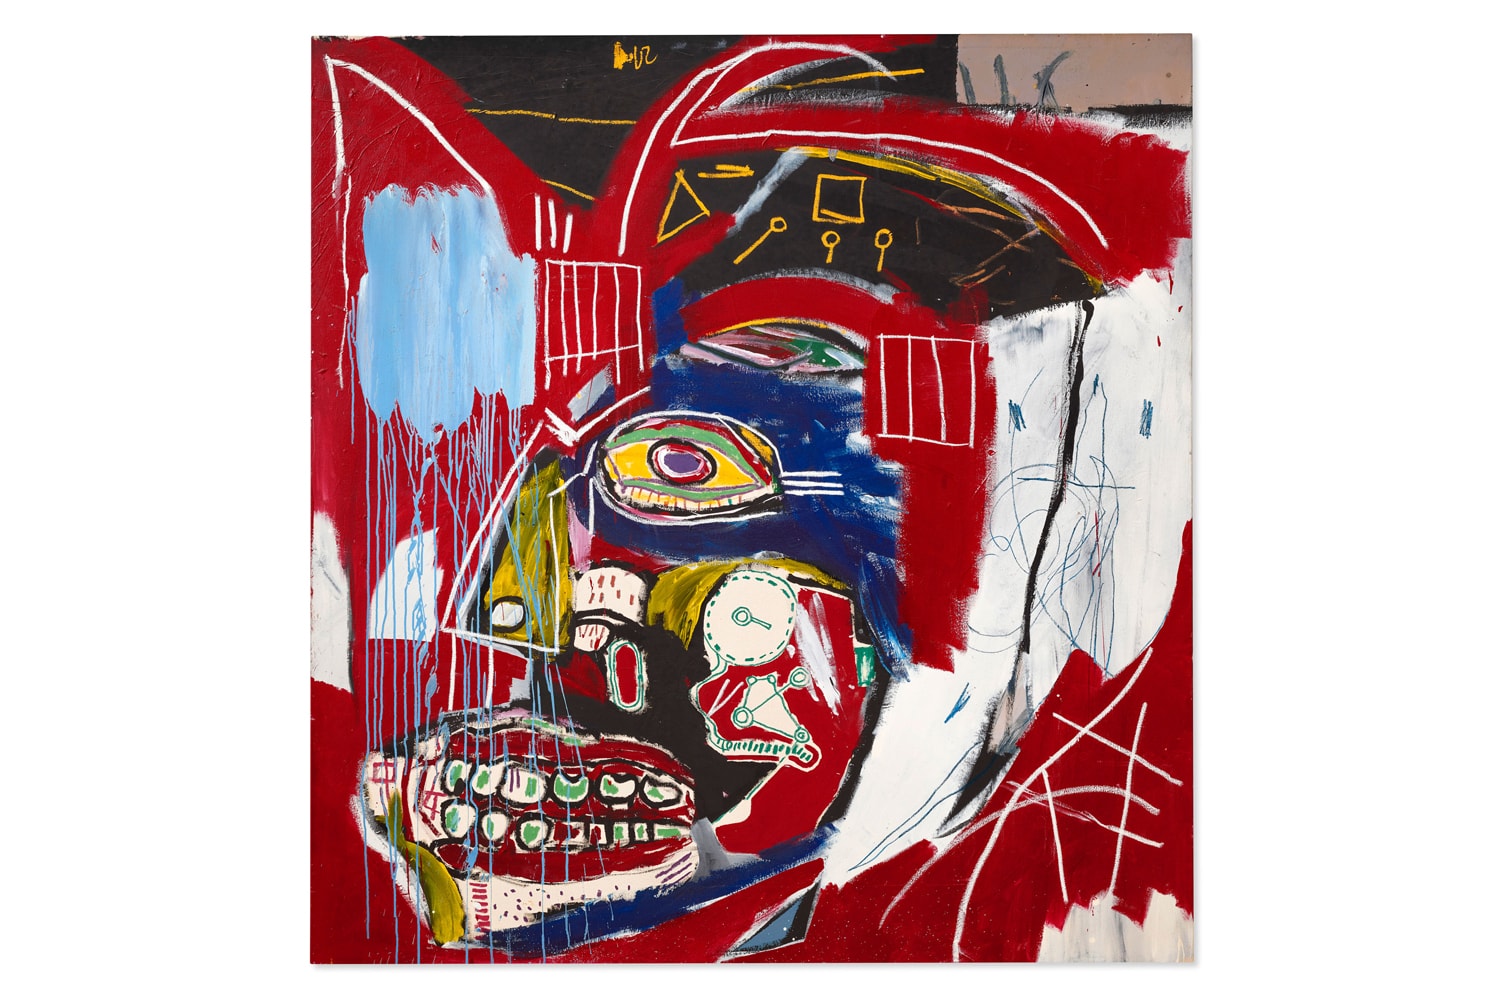 jean michel basquiat in this case skull painting christies auction